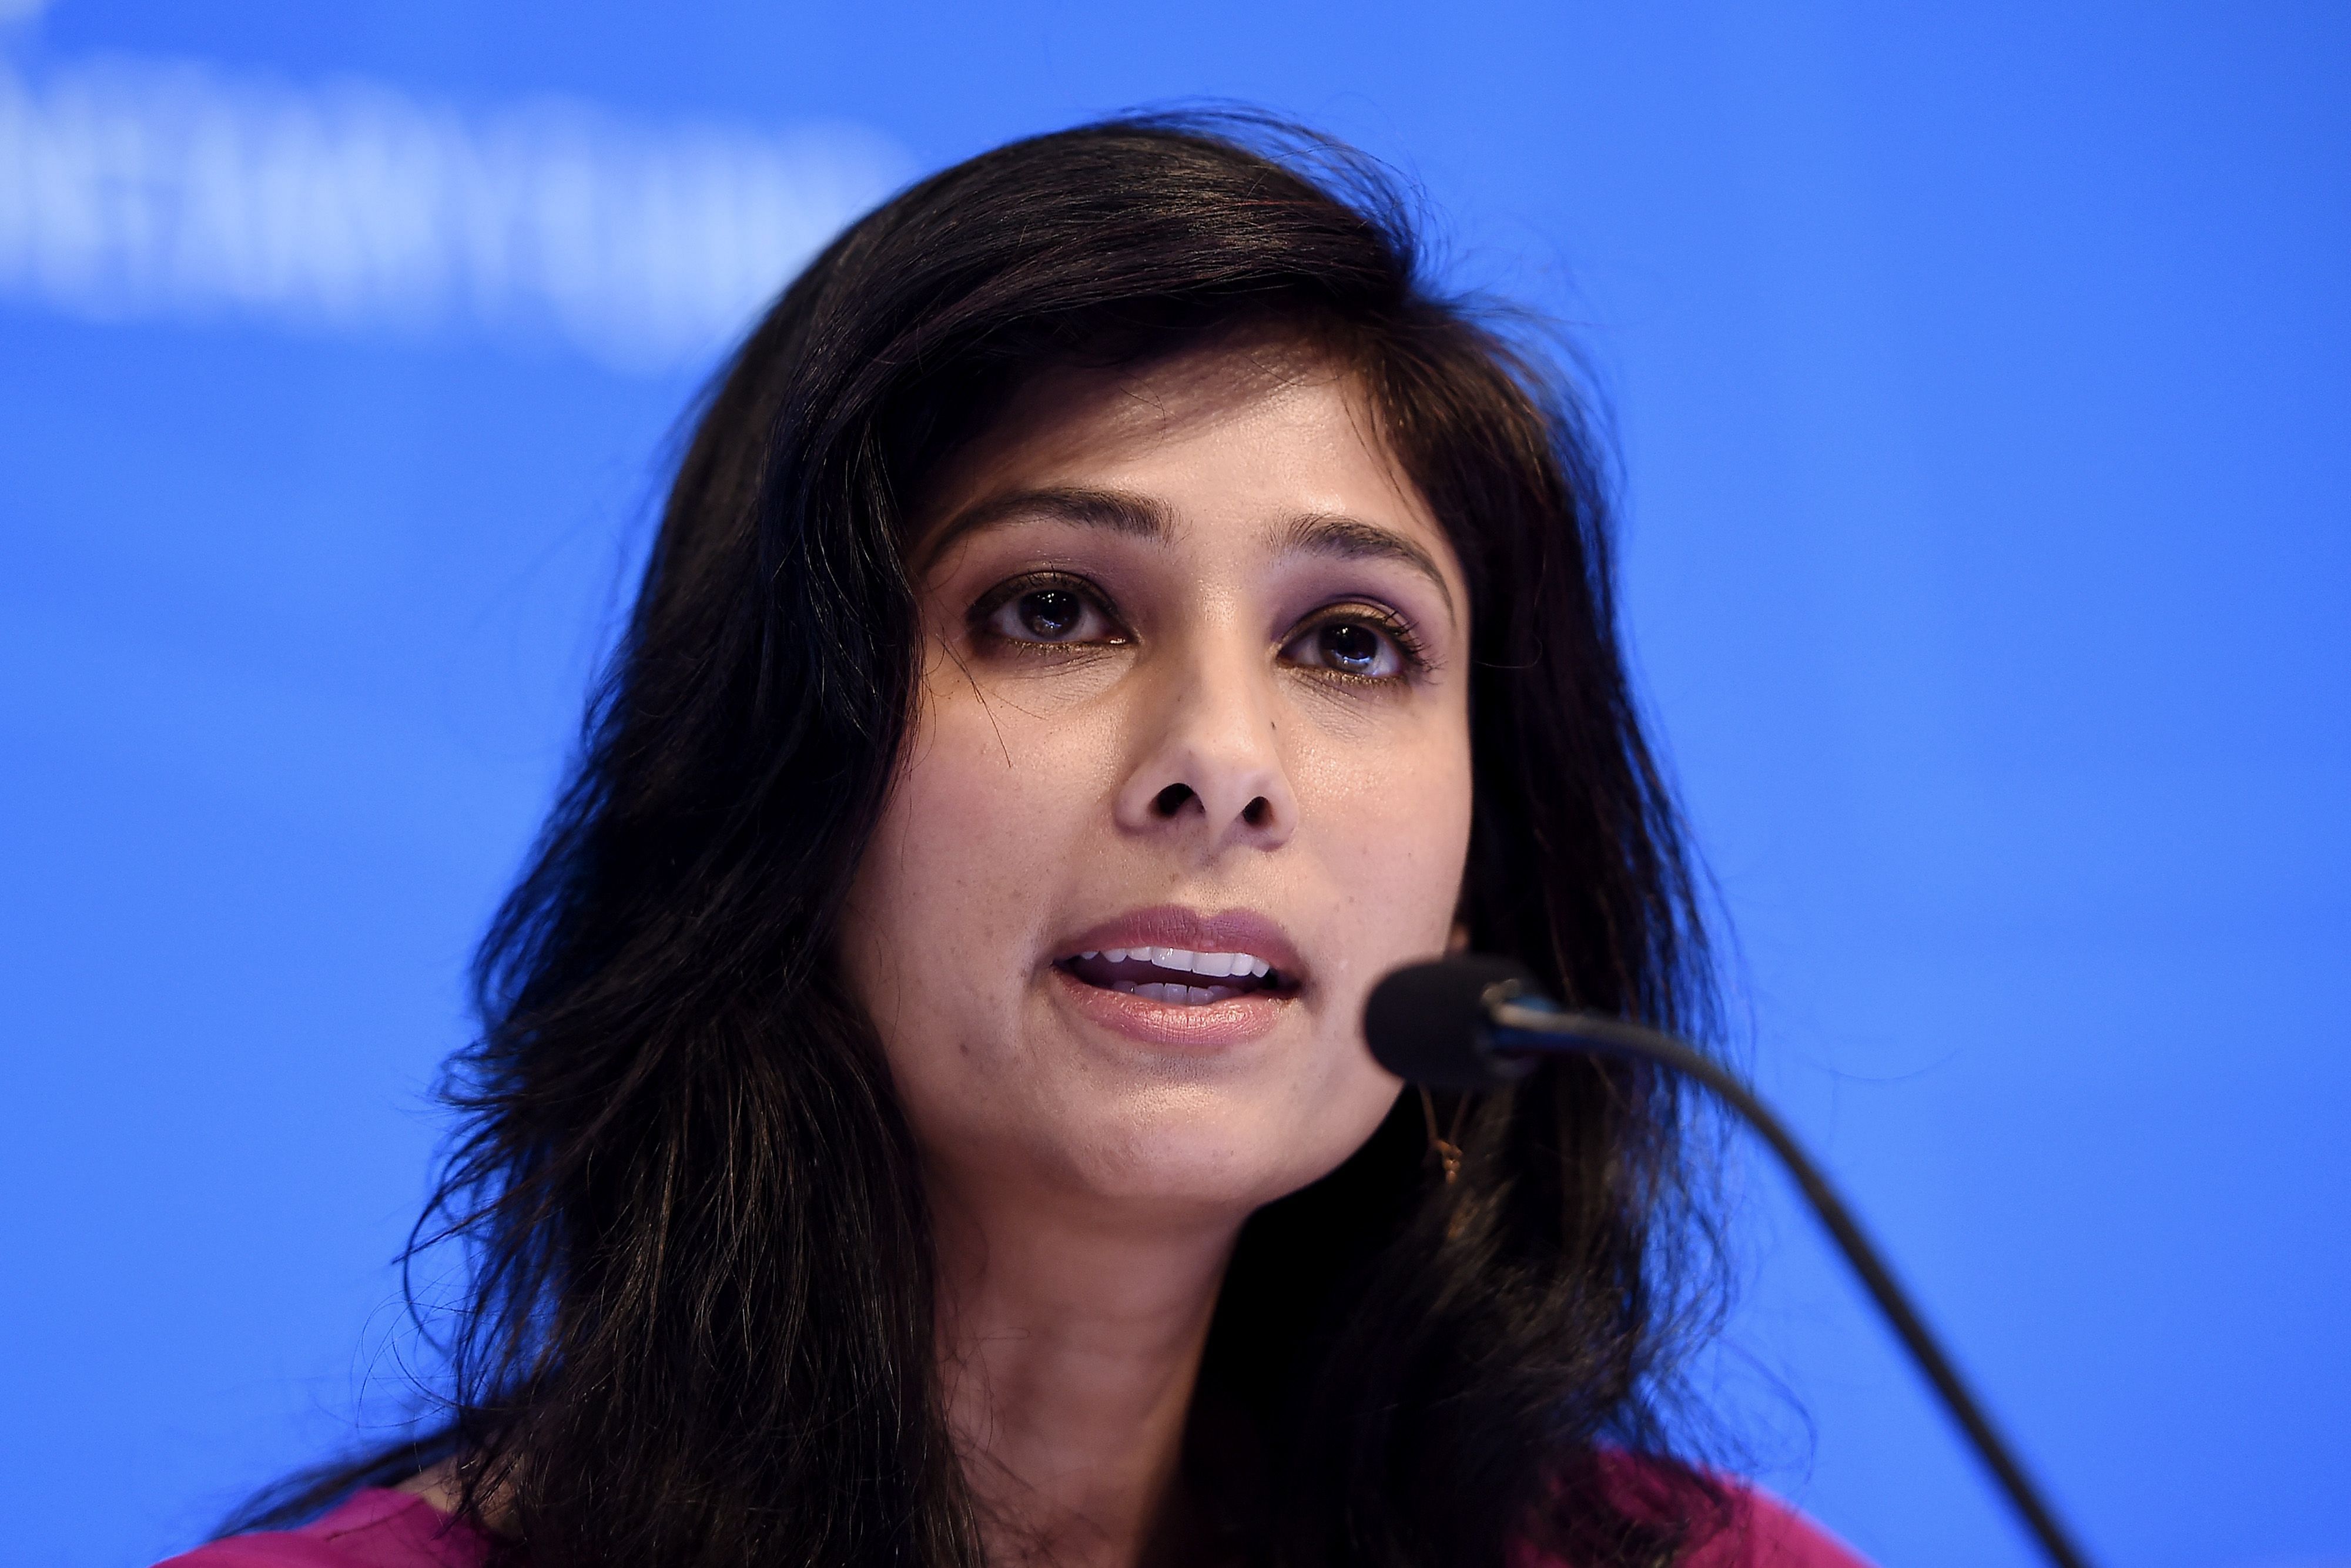 IMF chief economist Gita Gopinath last week said India's slowdown had "surprised to the downside," and said the fund is set to significantly downgrade its growth estimates for the Indian economy in the World Economic Outlook which will be released next month. (AFP Photo)